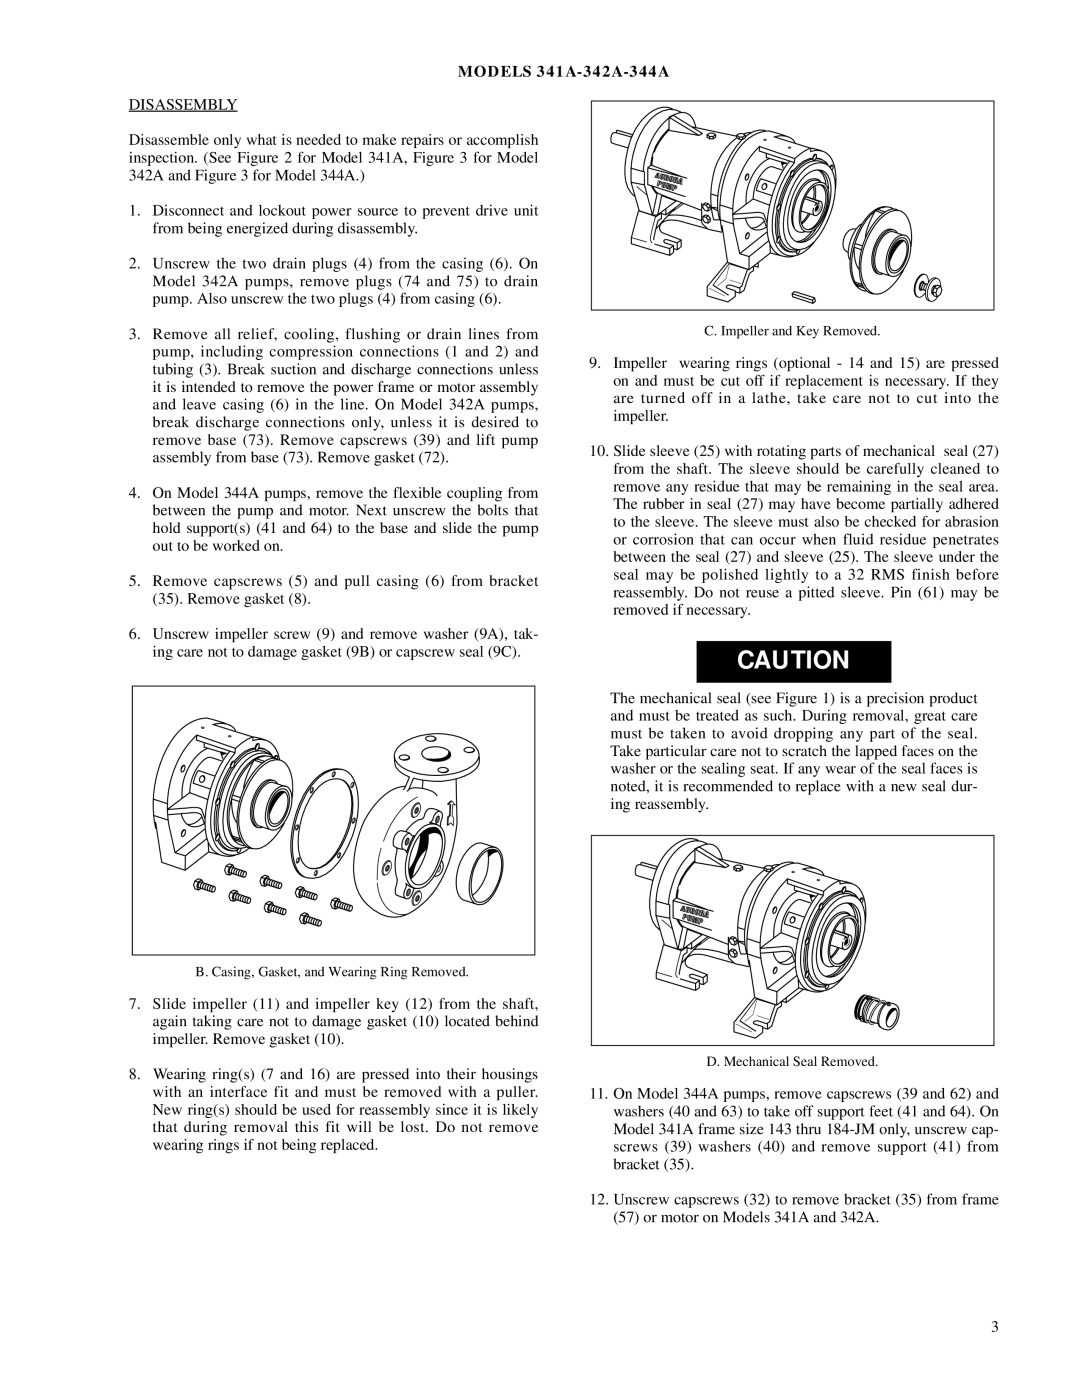 Aurora of America 344A manual Disassembl Y, Impeller, 57or motor on Models 341A and 342A, D. Mechanical Seal Removed 